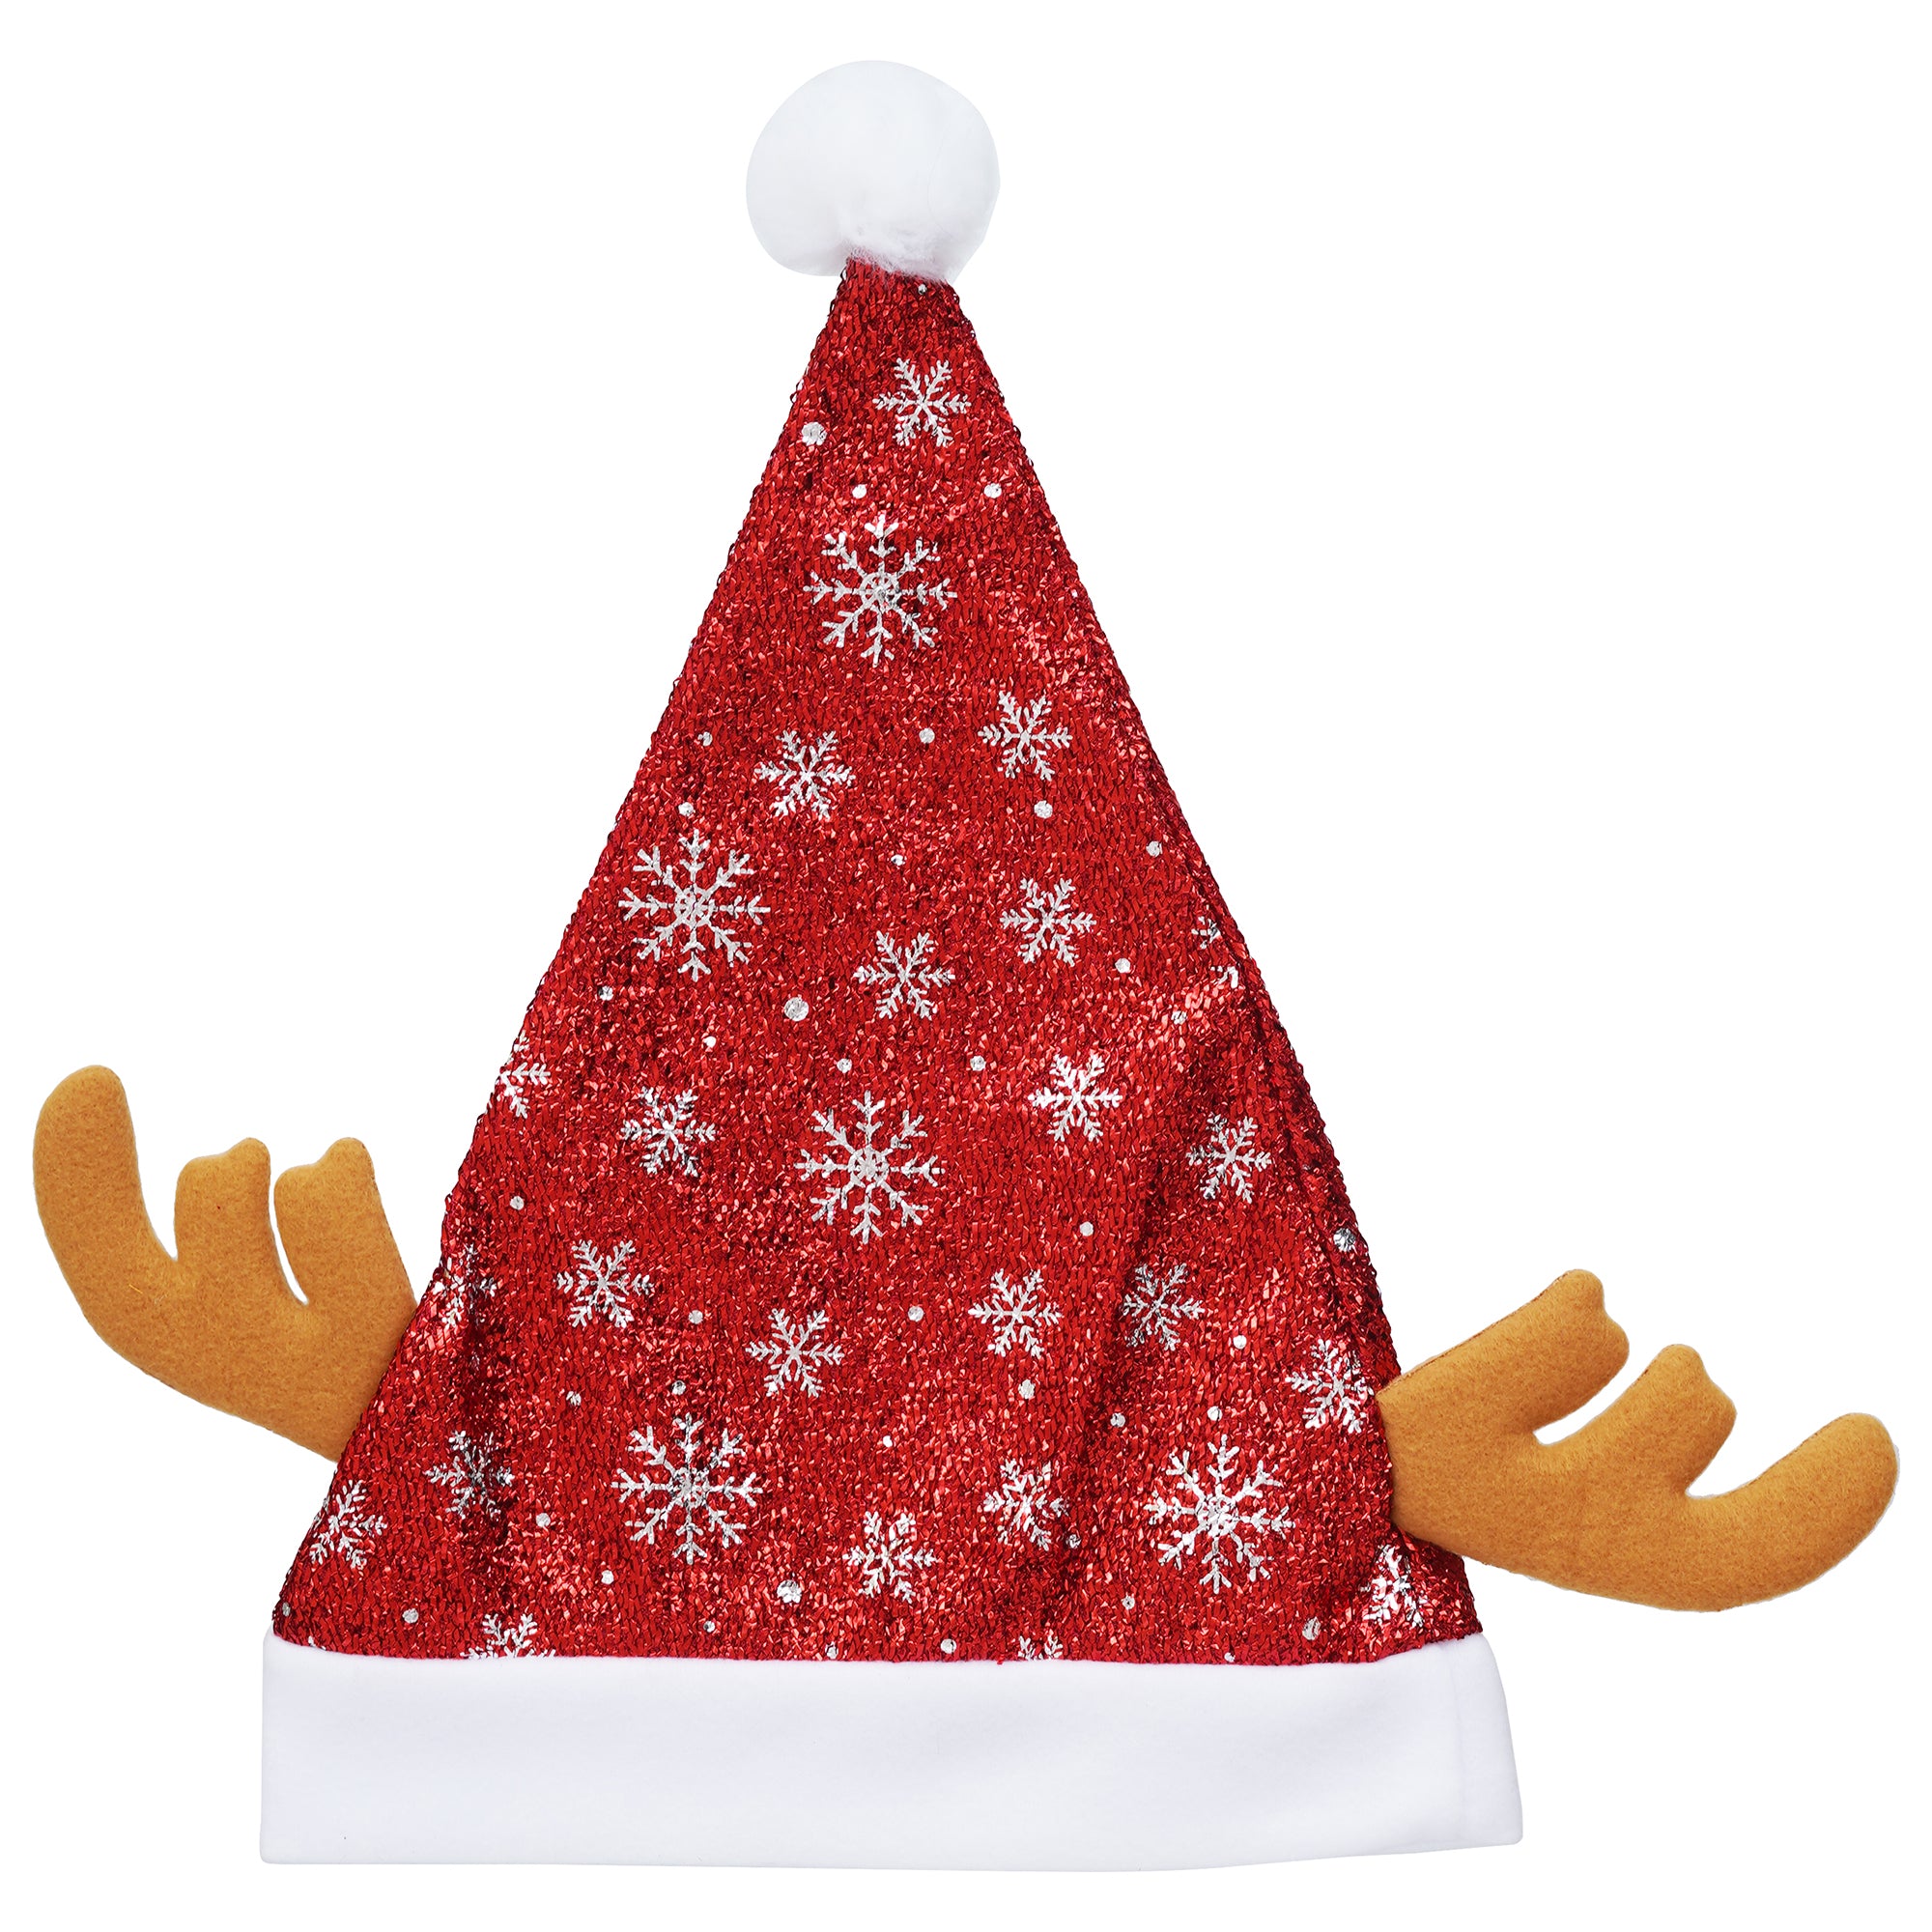 eCraftIndia Merry Christmas Snowflake Star Printed Santa Cap  Santa Claus Hat for Christmas Party Best Gift for Boys & Girls 6